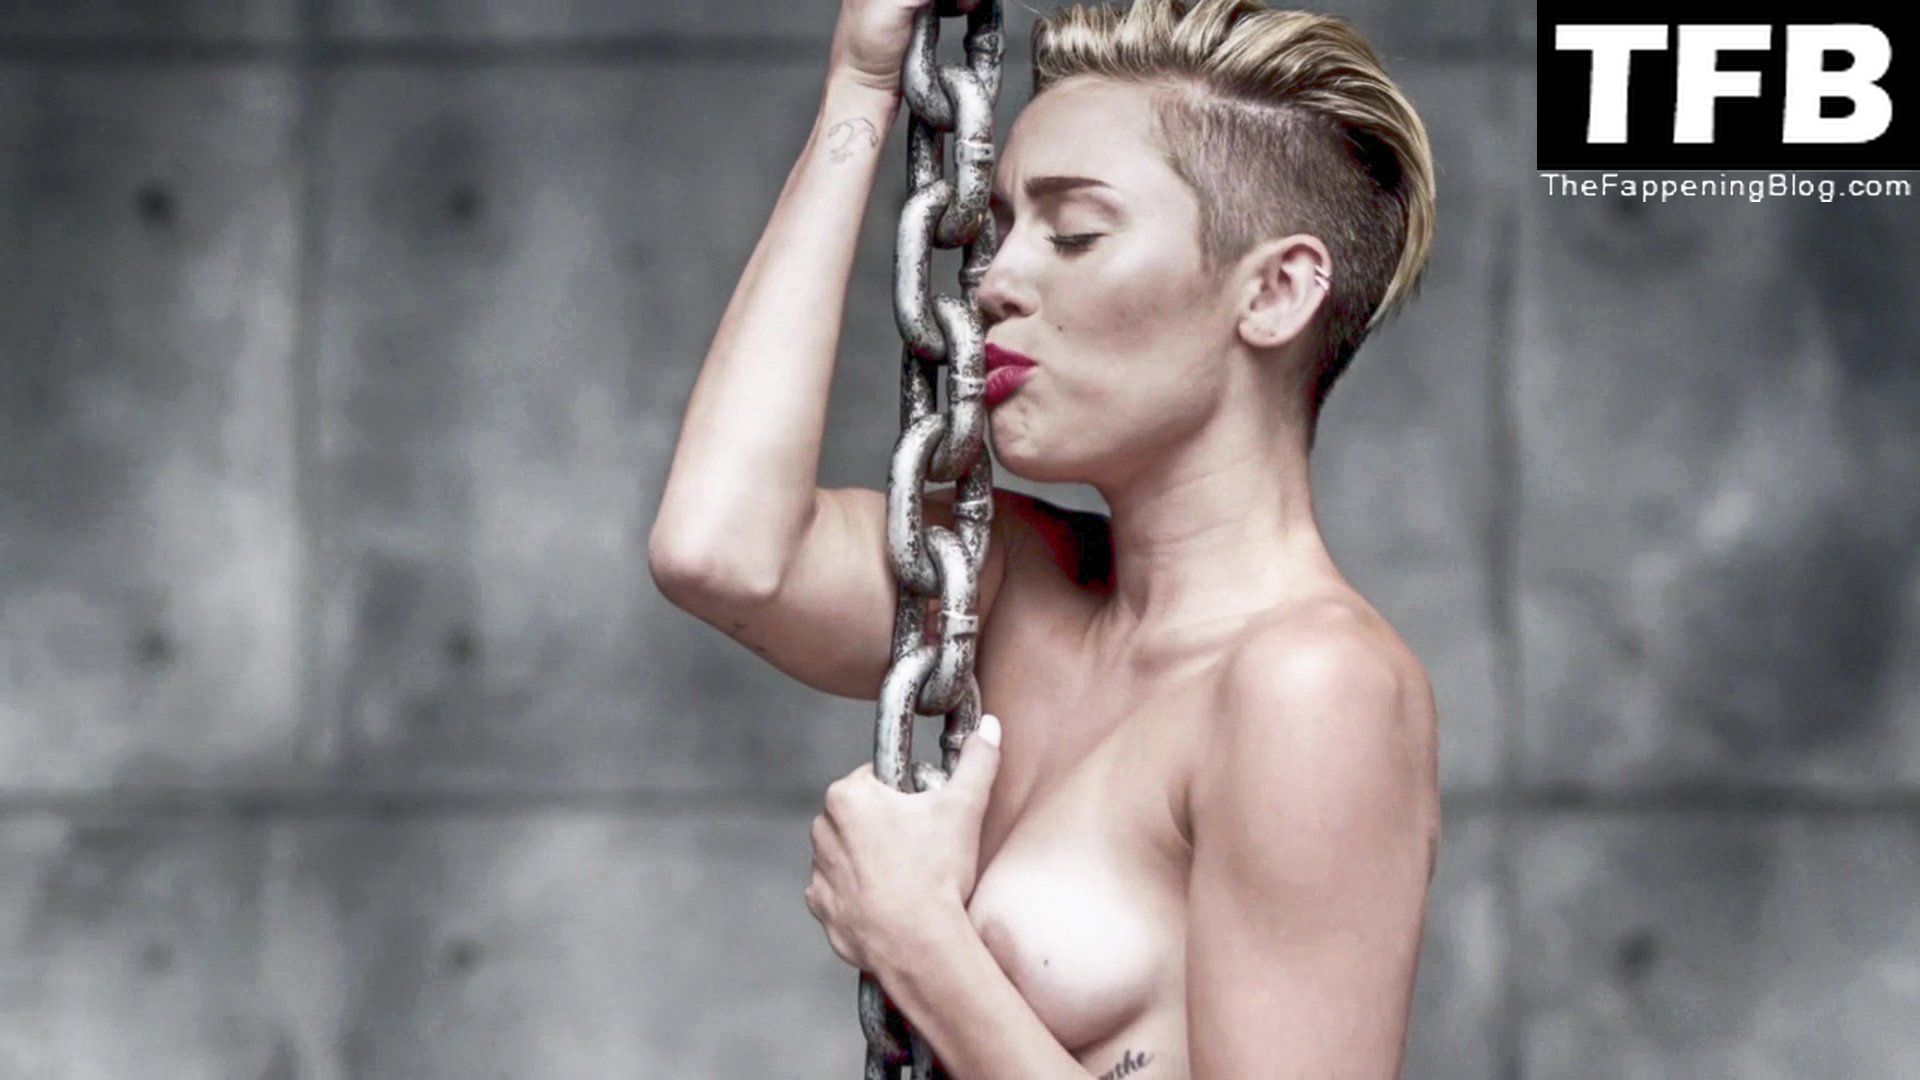 Miley-Cyrus-Nude-Wrecking-Ball-The-Fappening-Blog-10.jpg